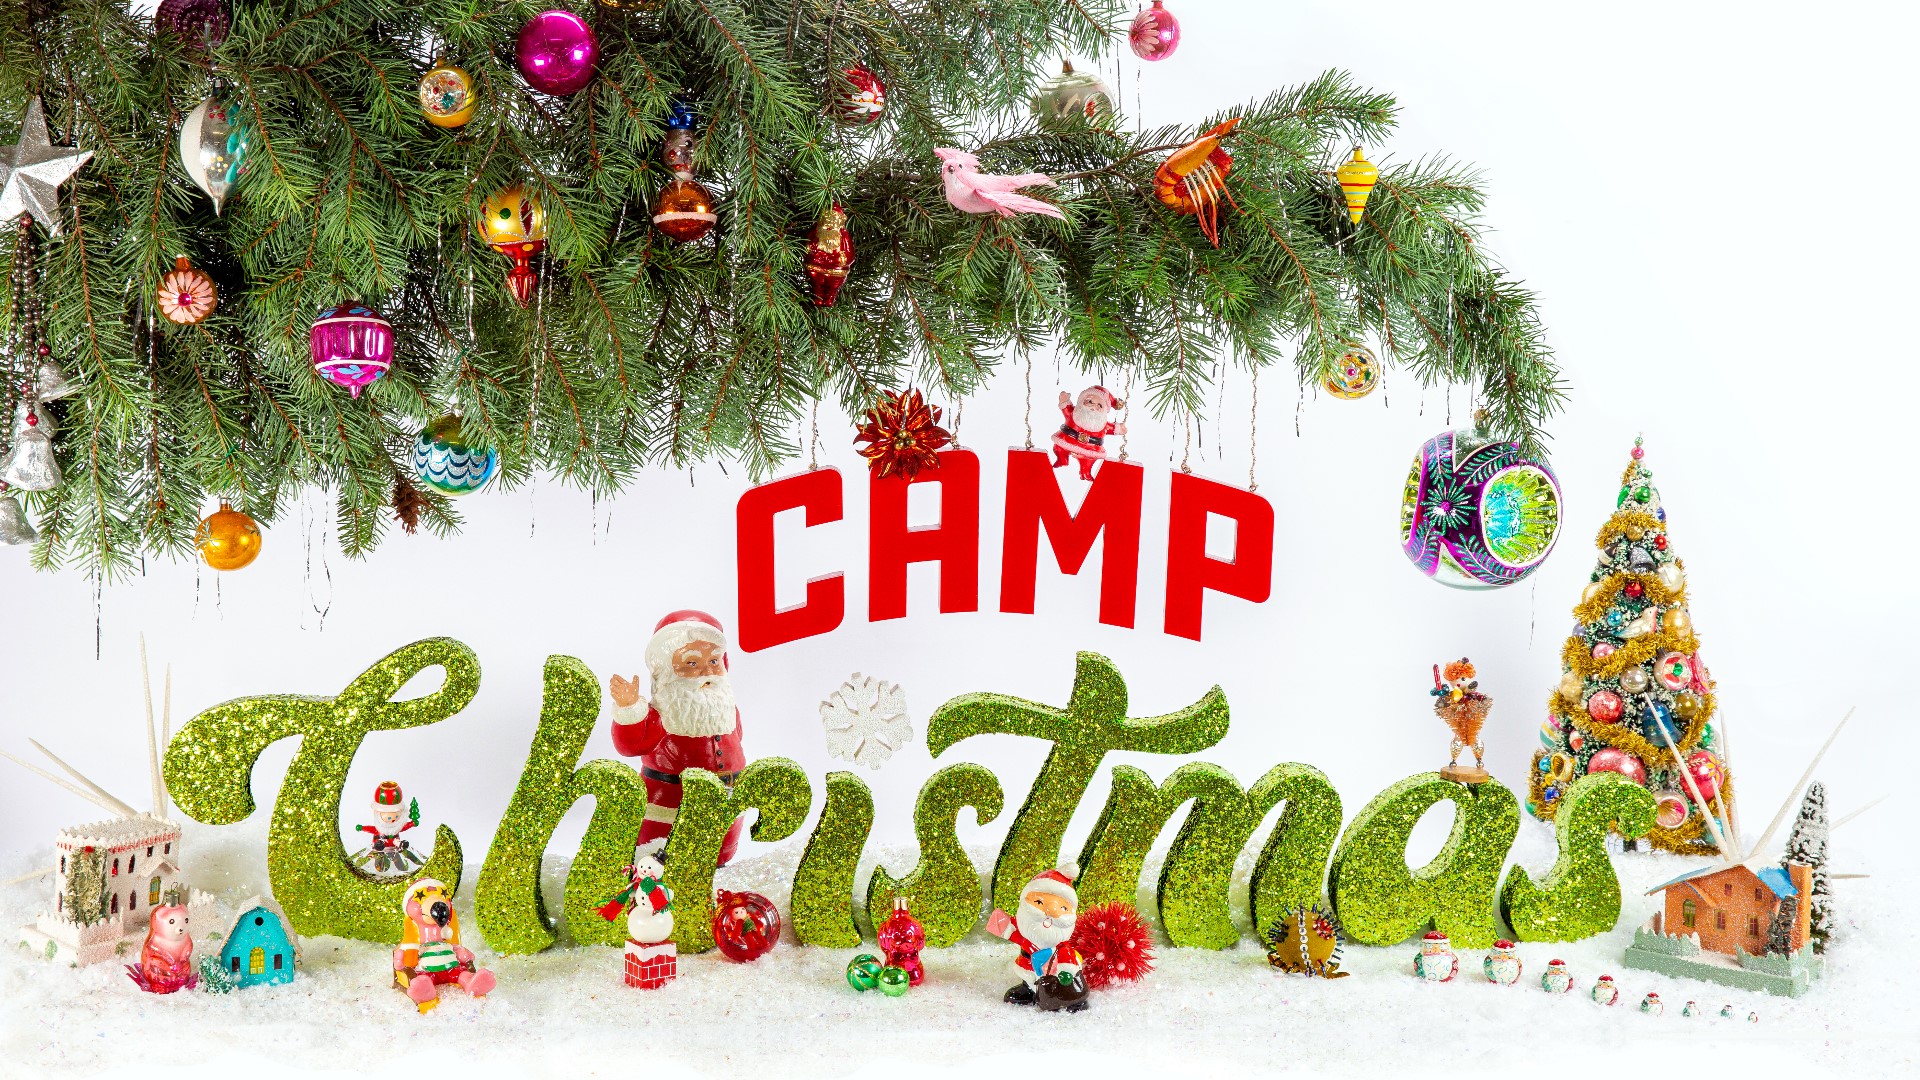 Halloween came and went less than a week ago, but some of our neighbors didn't notice. Their "Camp Christmas" experience is coming to Stanley Marketplace Nov. 21.